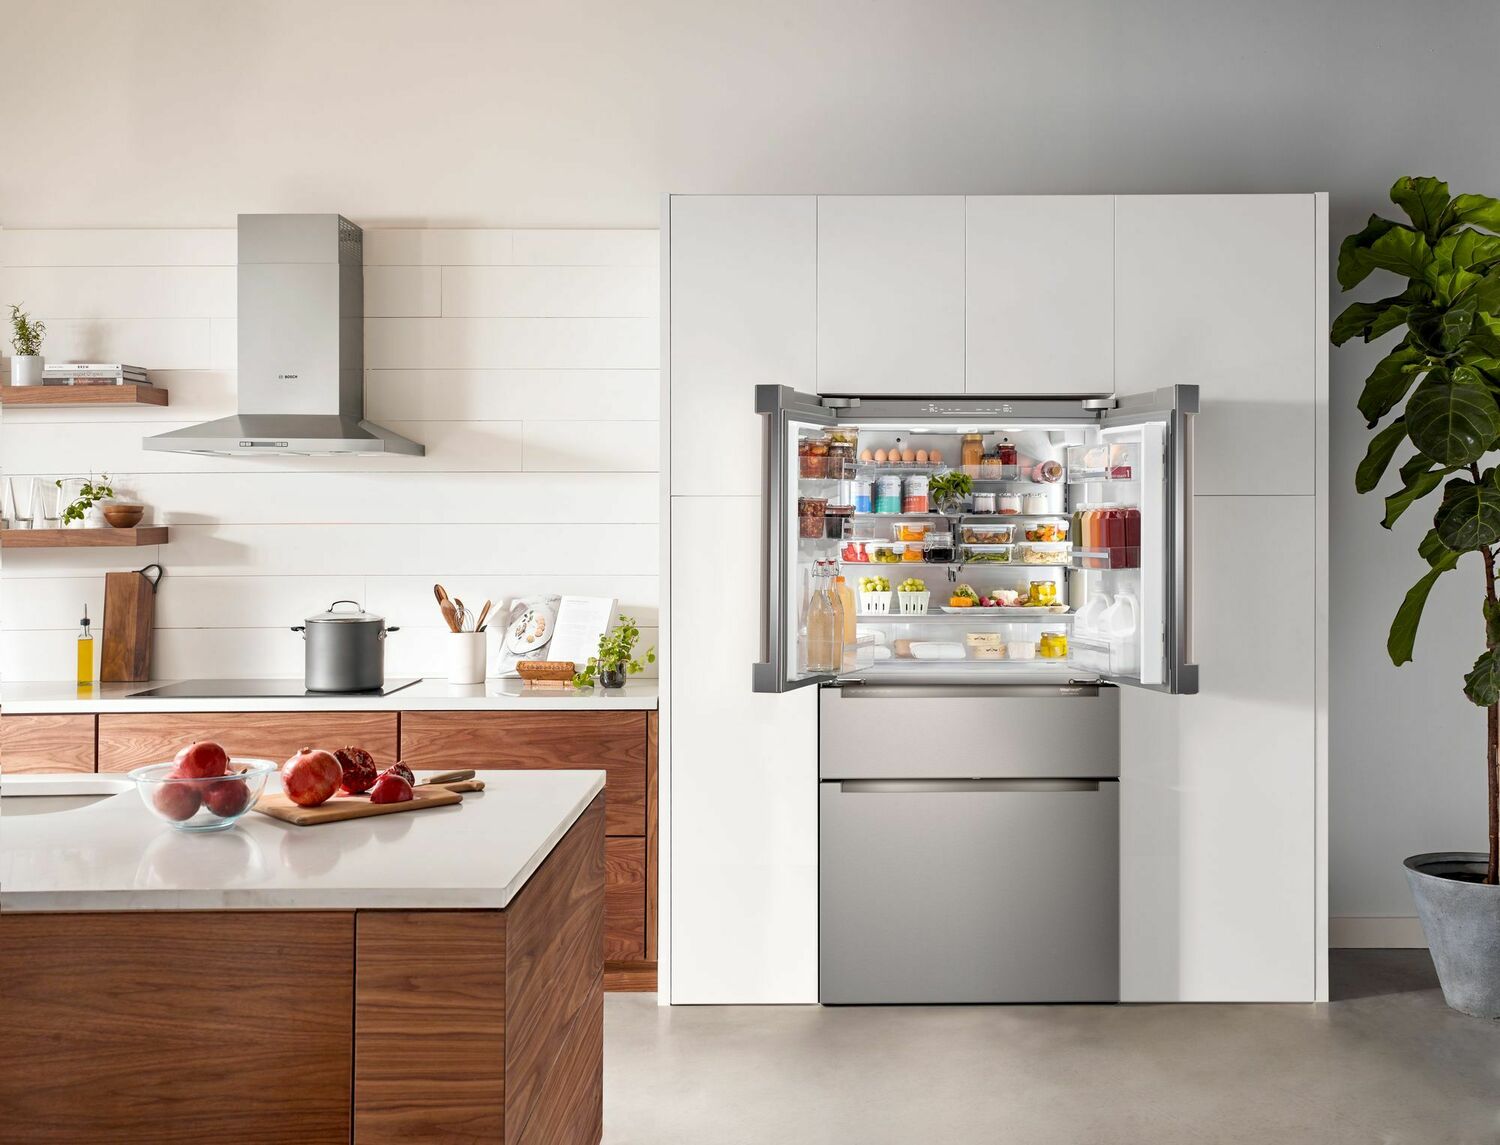 Bosch B36CL80ENS 800 Series French Door Bottom Mount Refrigerator 36'' Easy Clean Stainless Steel B36Cl80Ens